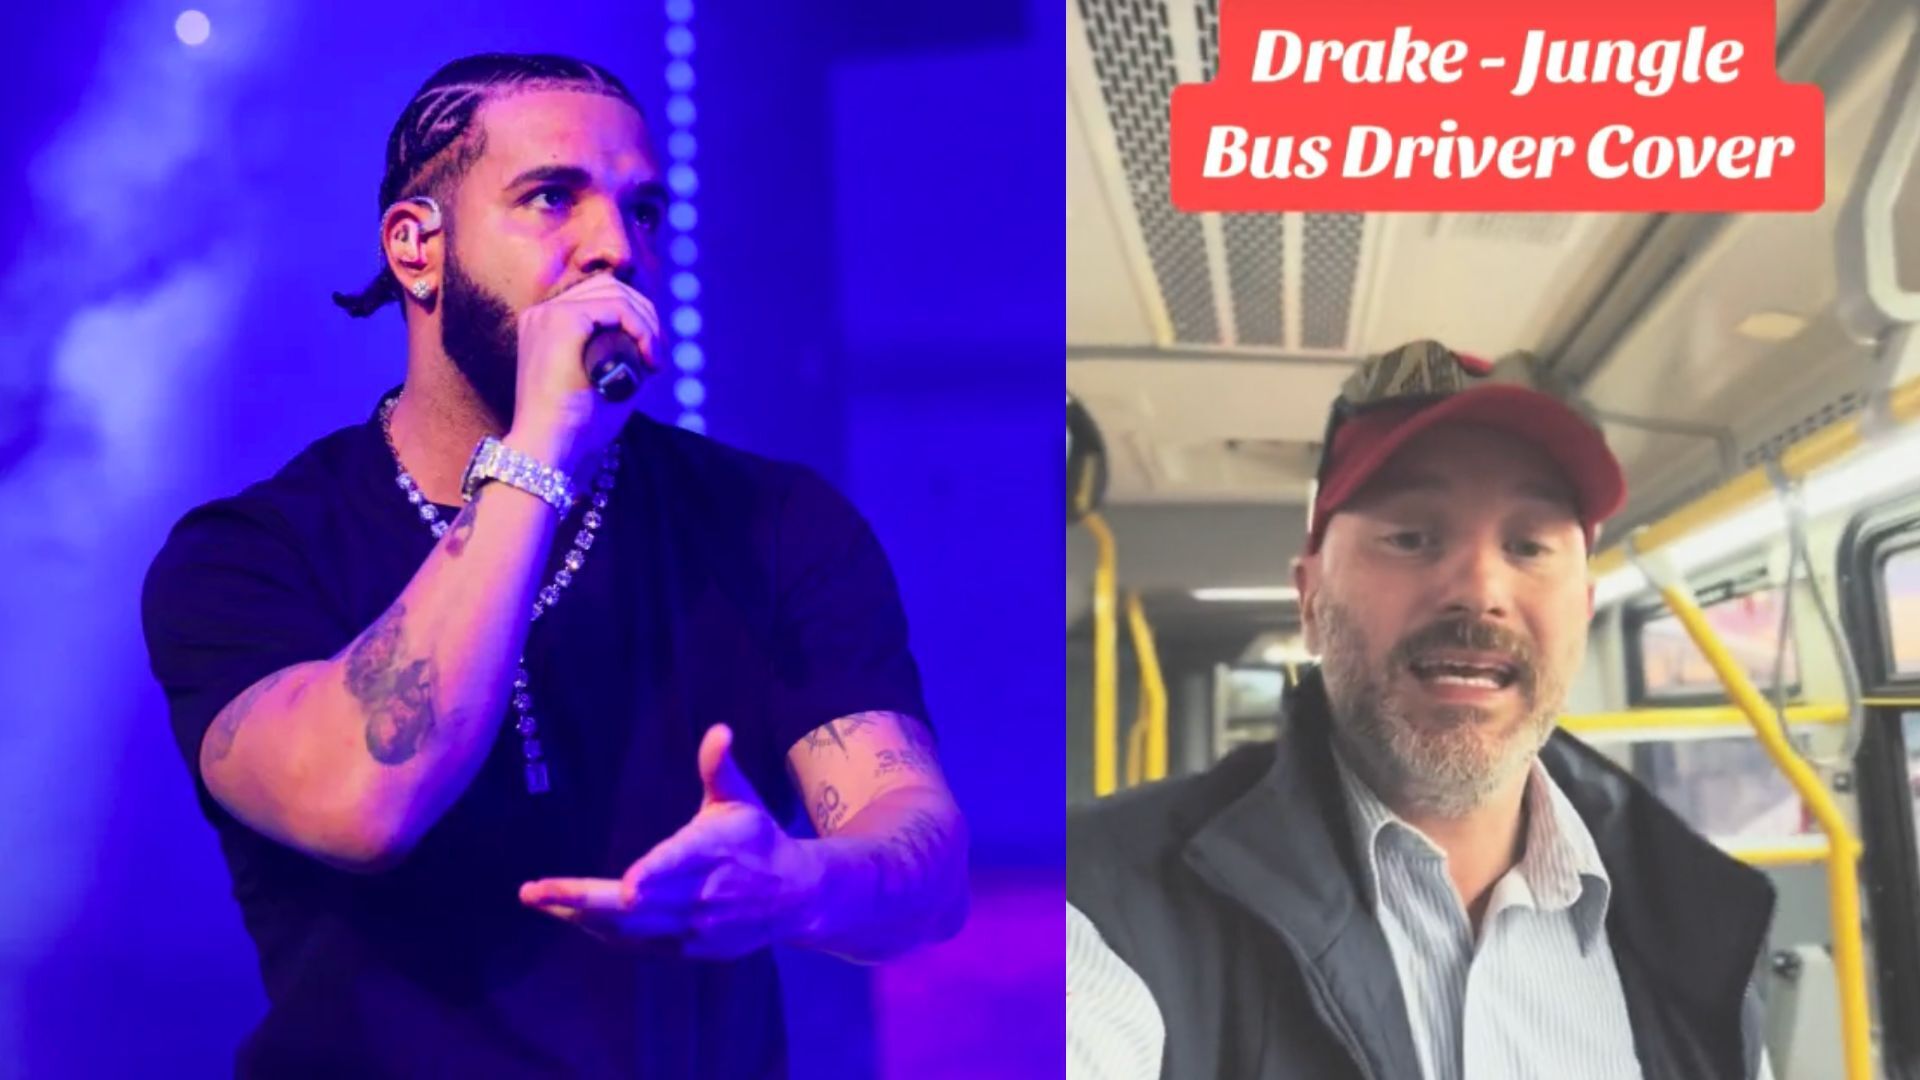 Toronto bus driver goes viral for his cover of Drake’s “Jungle”